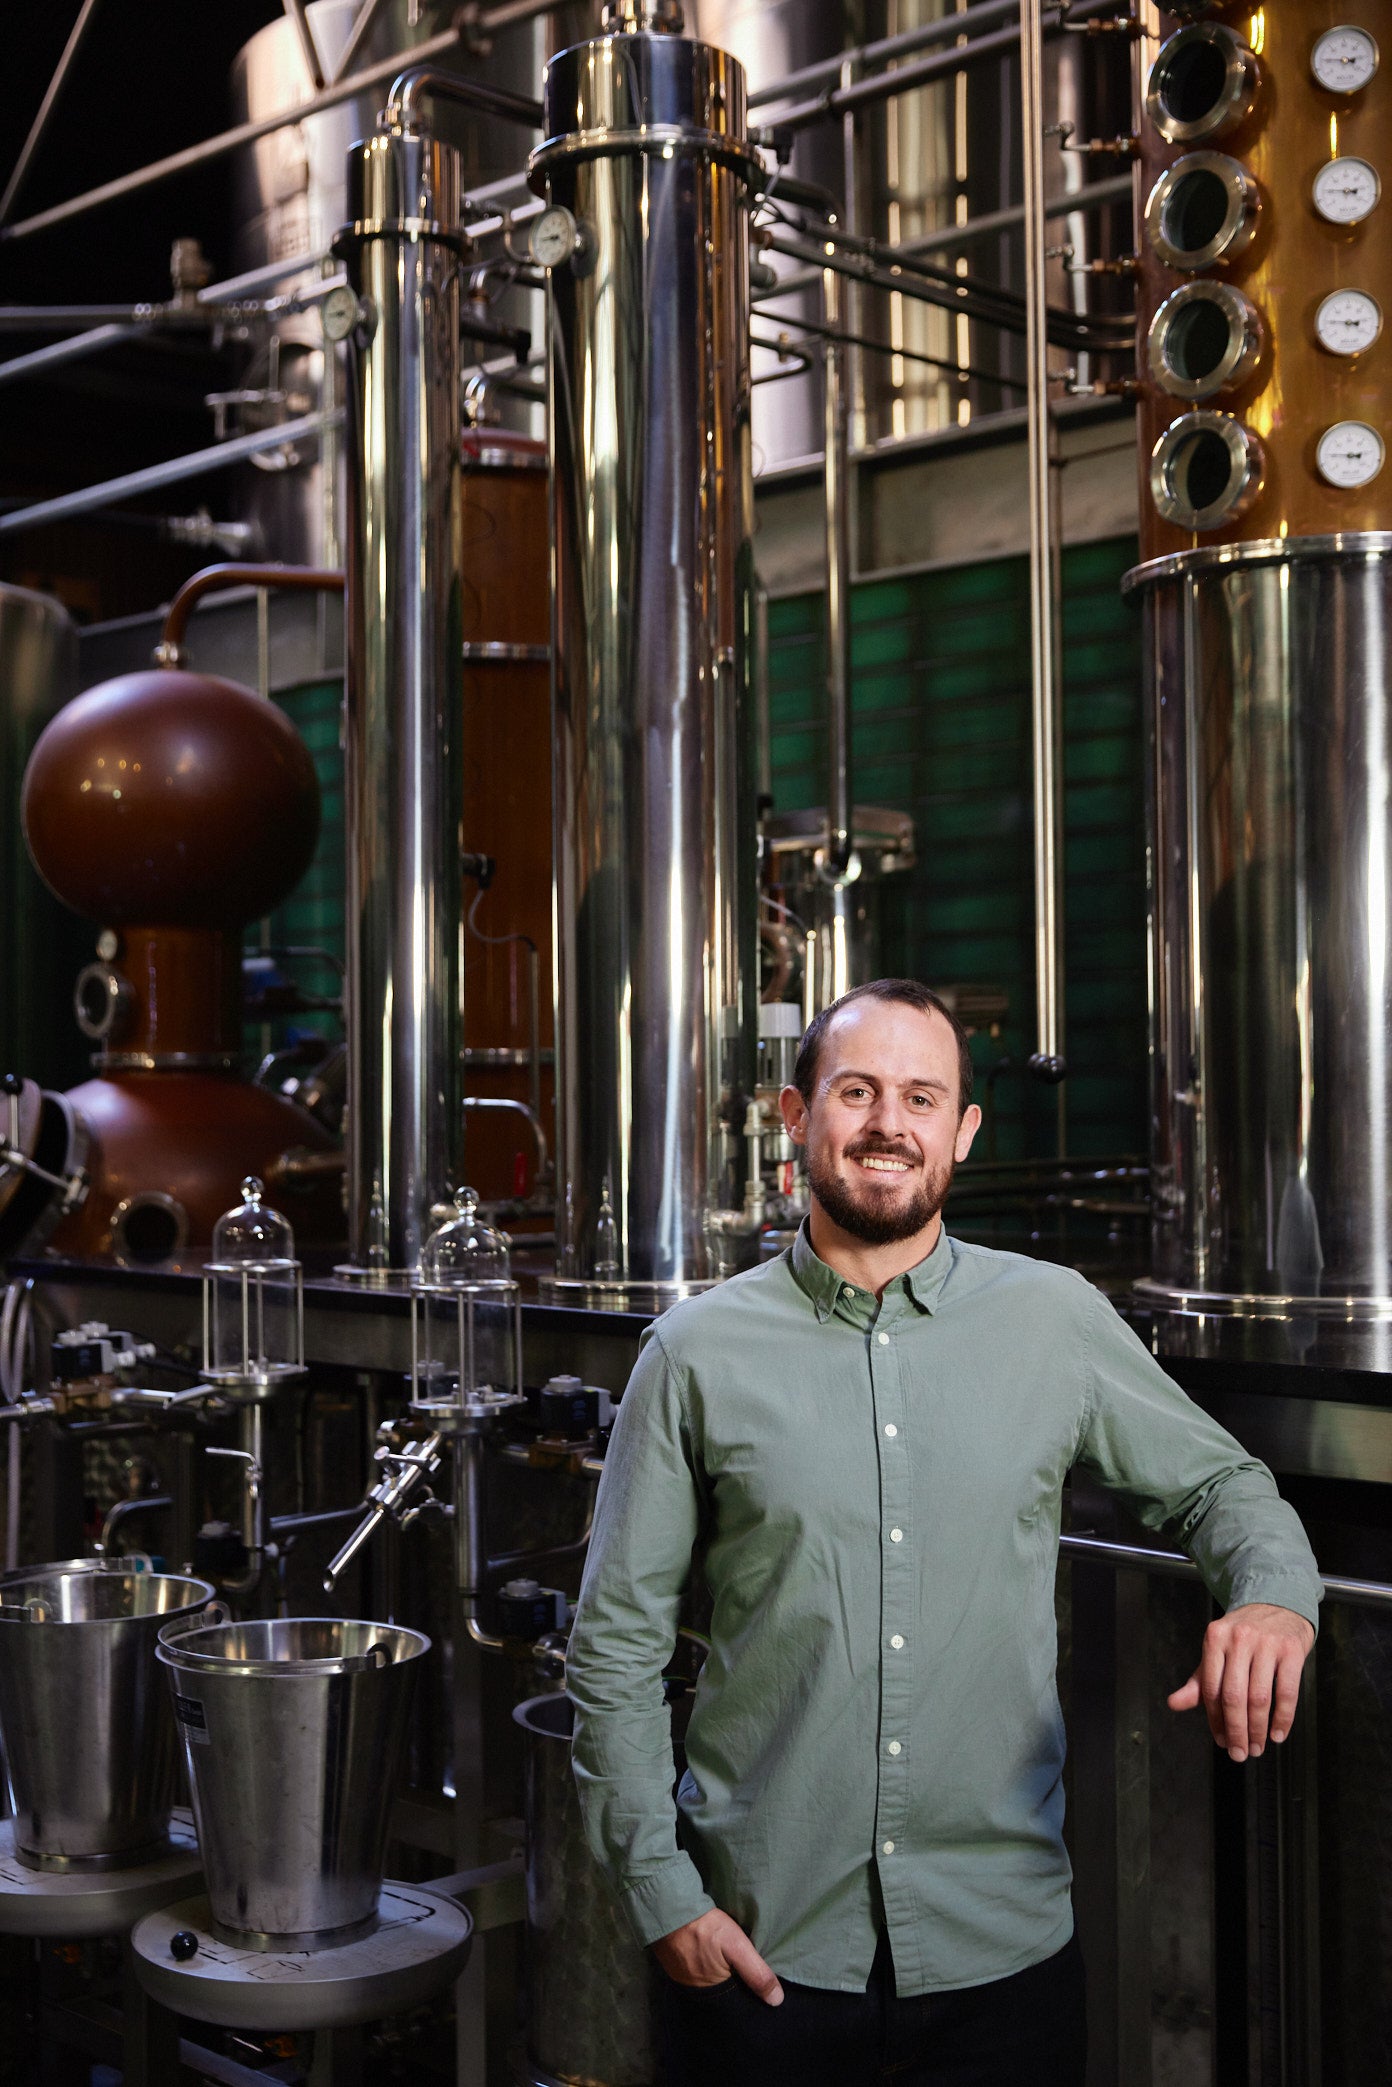 Republic of Fremantle Welcomes New Distiller to the Helm